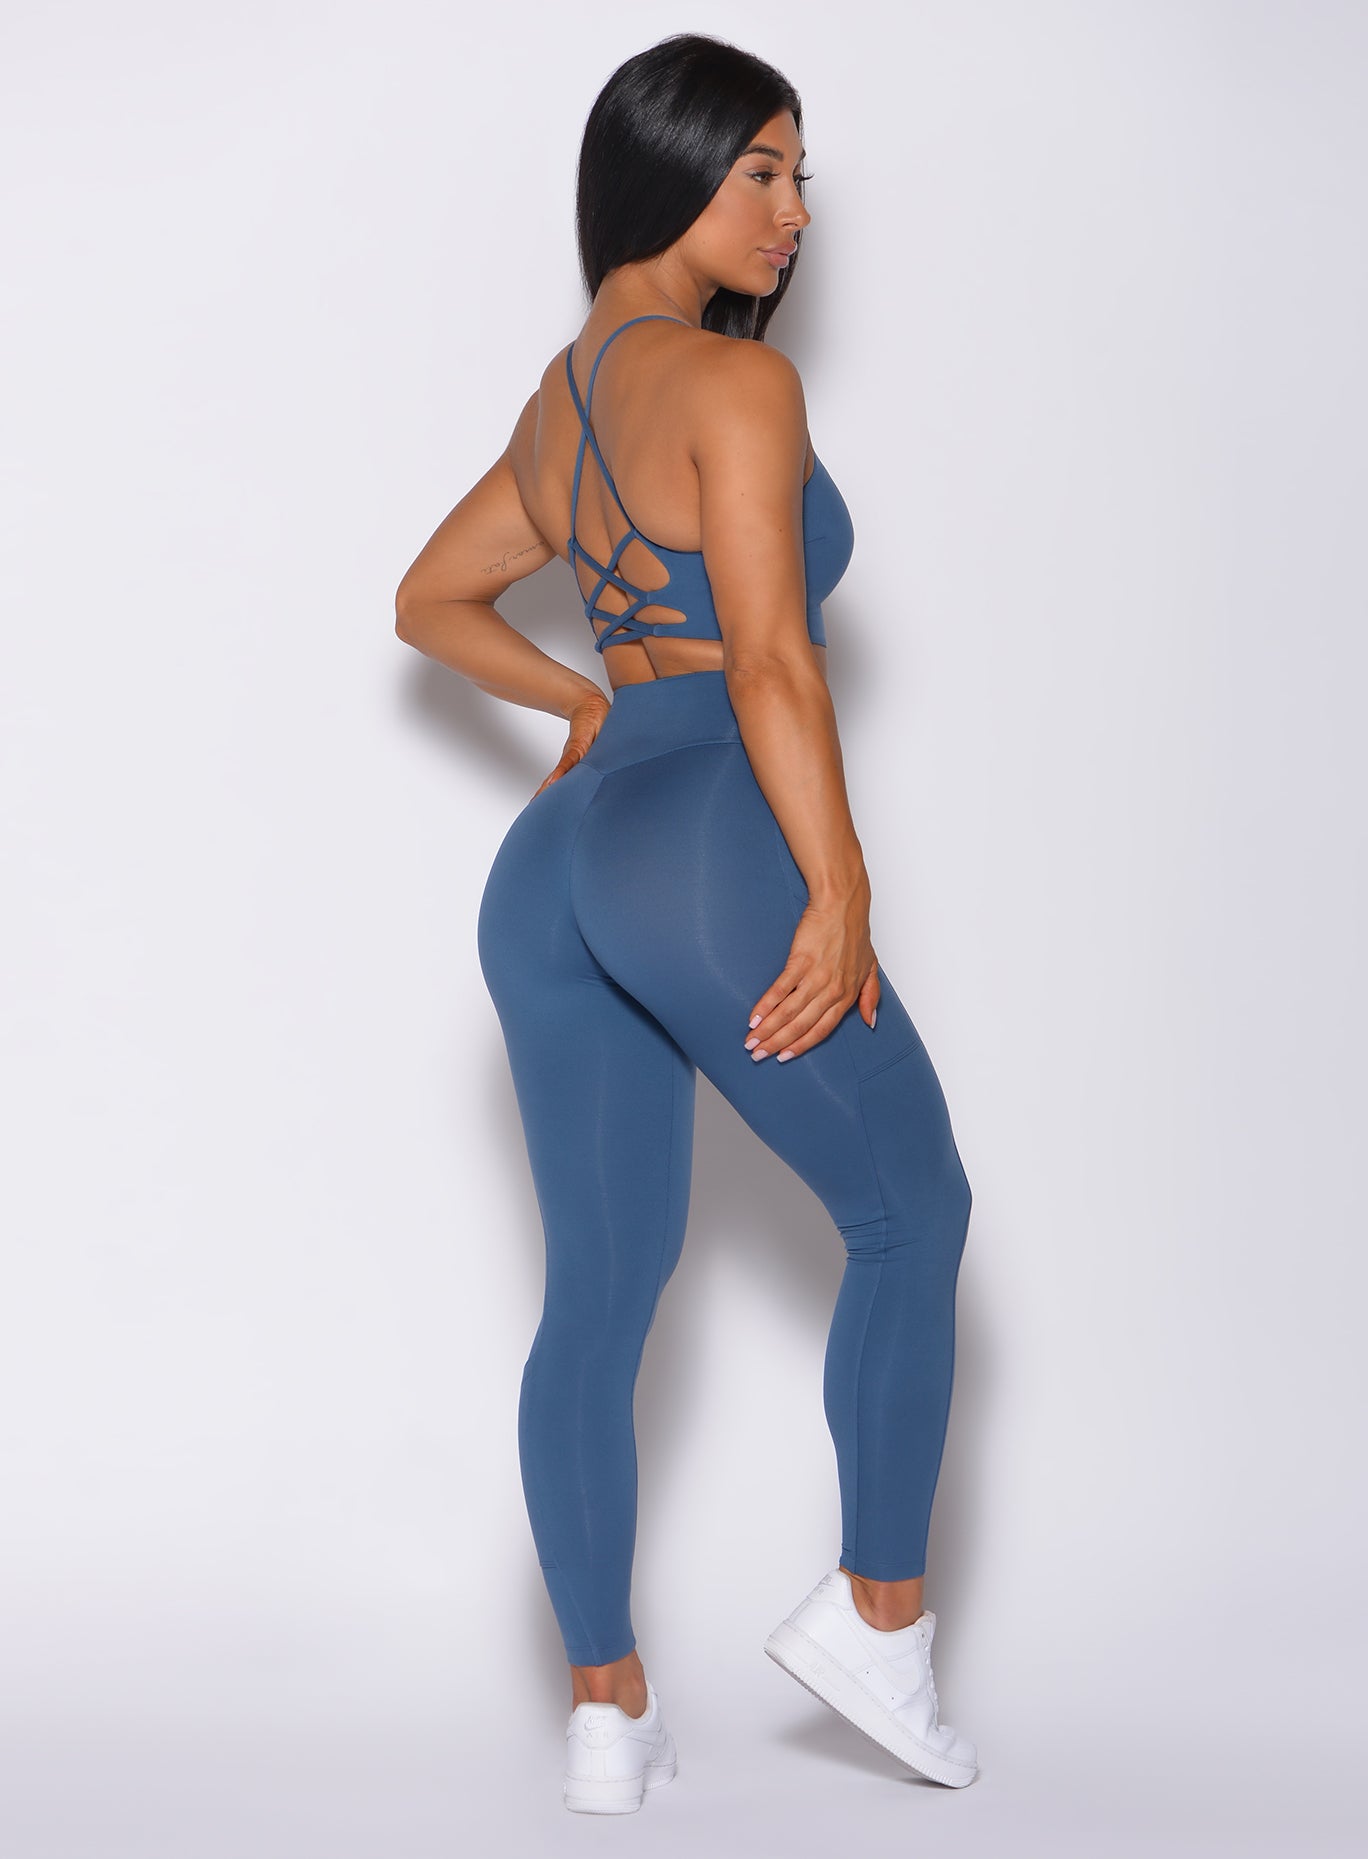 Right side profile view of a model in our empower leggings in cool water color and a matching bra